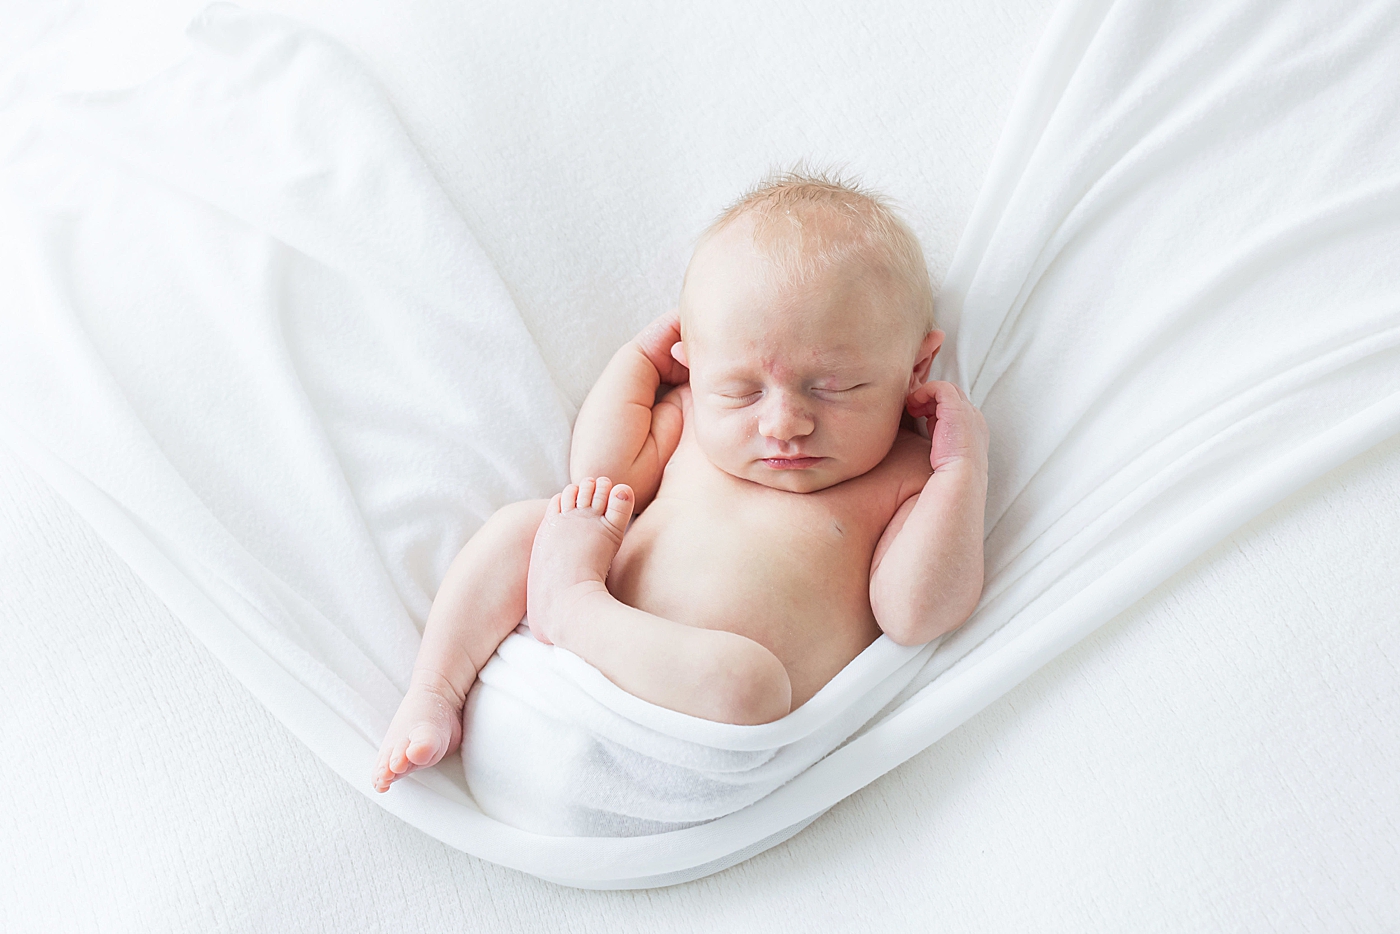 Relaxed newborn pose during session with Fresh Light Photography.